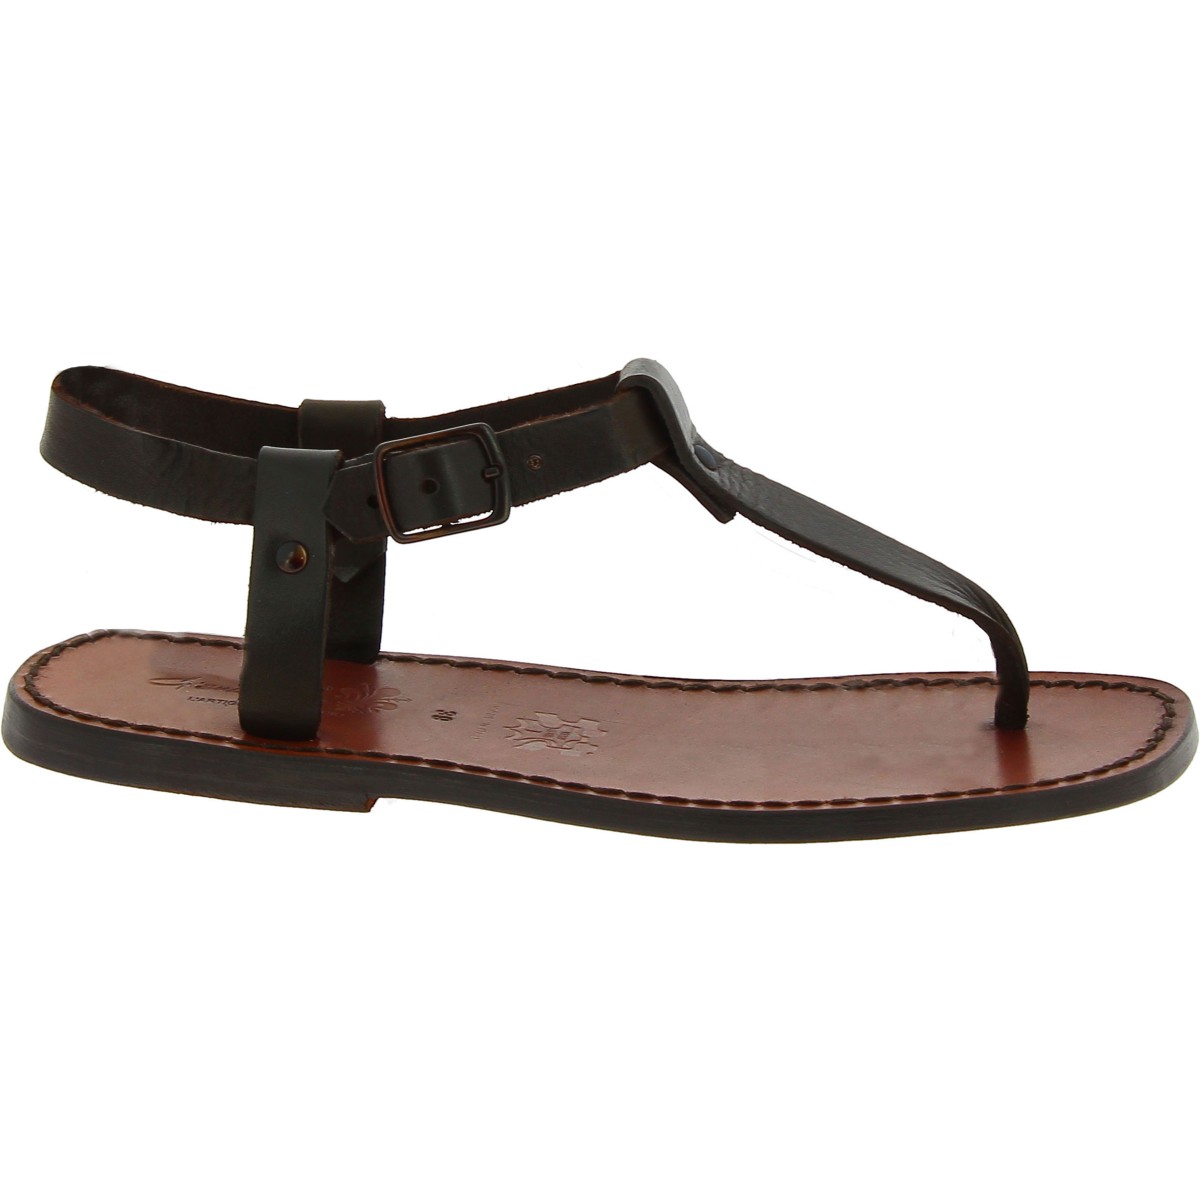 Handmade men's brown leather thong sandals | The leather craftsmen